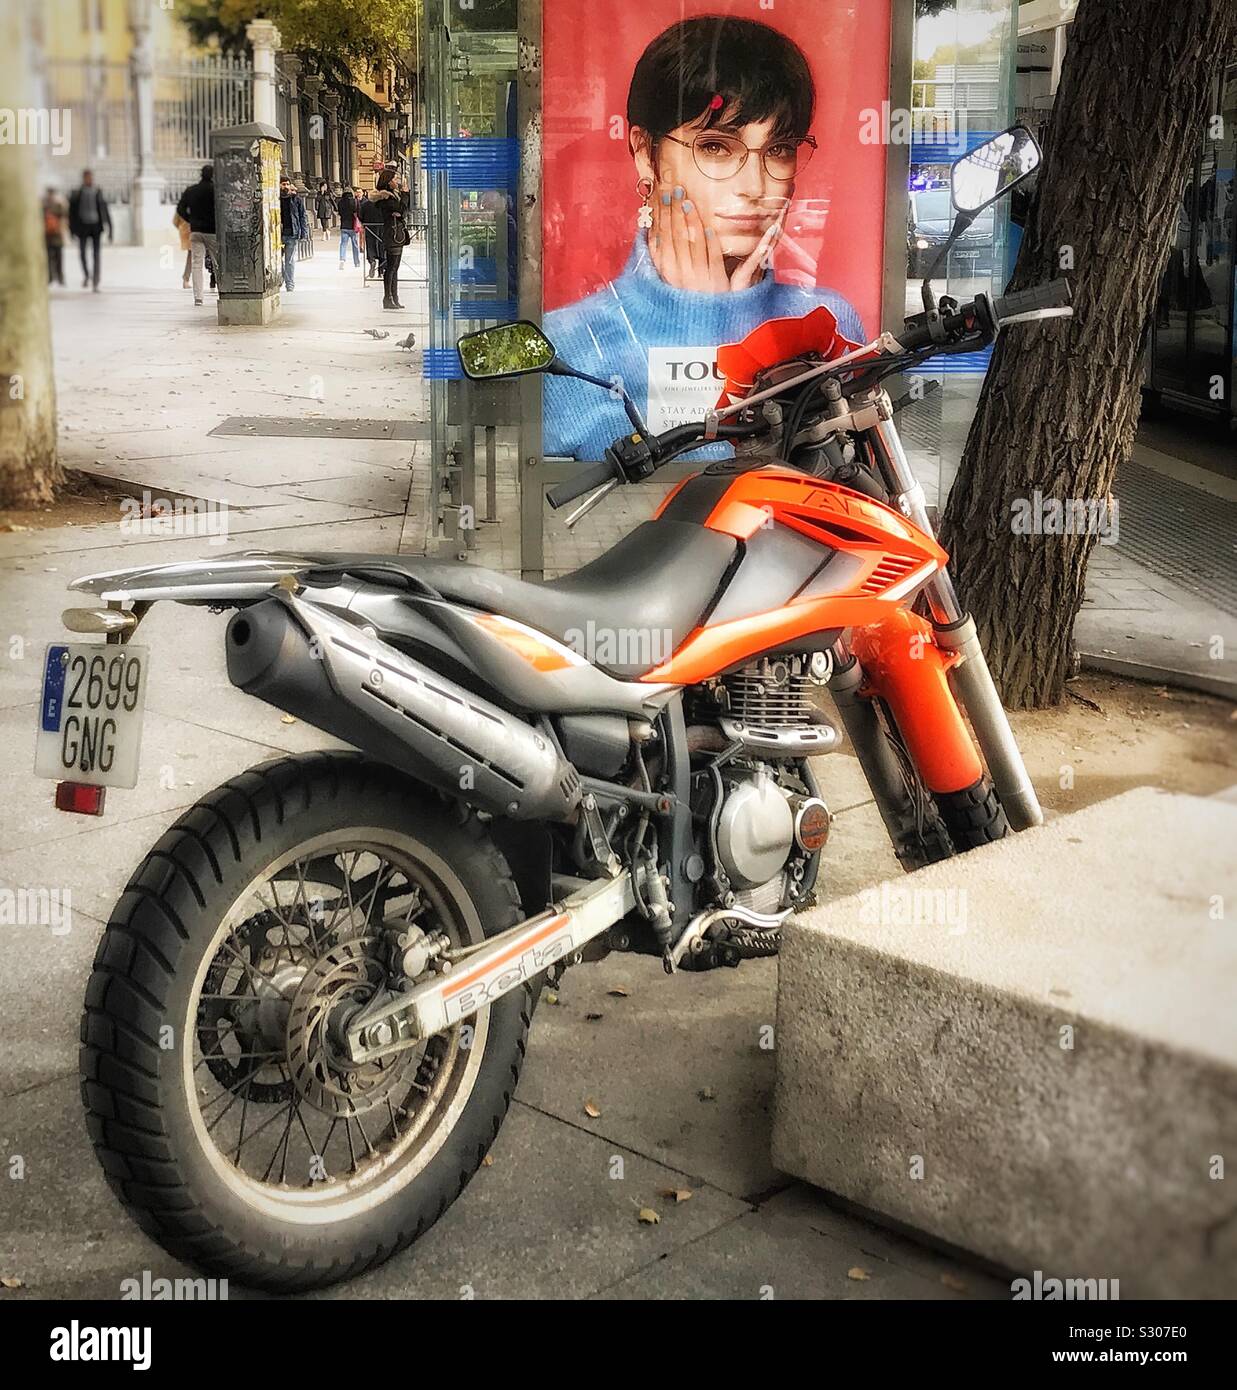 A motor bike is parked on the pavement in front of a bus shelter on which there is a photo of a woman in an advertisement Stock Photo